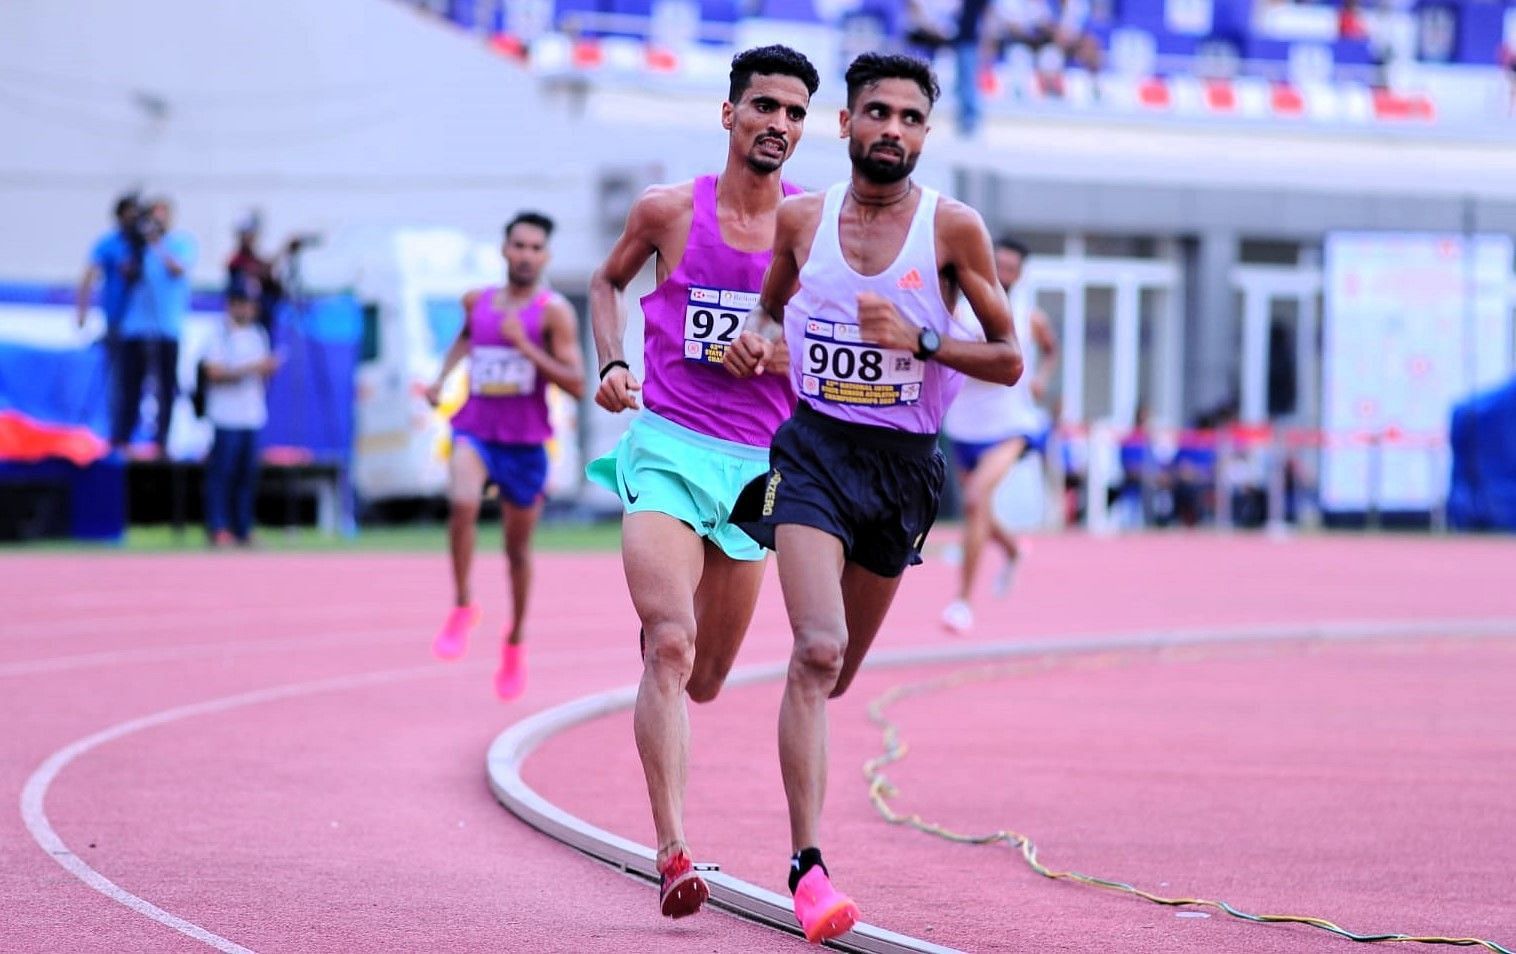 Kartik Kumar (chest no 908) wins men&rsquo;s 10,000m race on the opening day of the 62nd National Inter State Senior Athletics Championship in Bhubaneswar on Thursday. Photo credit: AFI